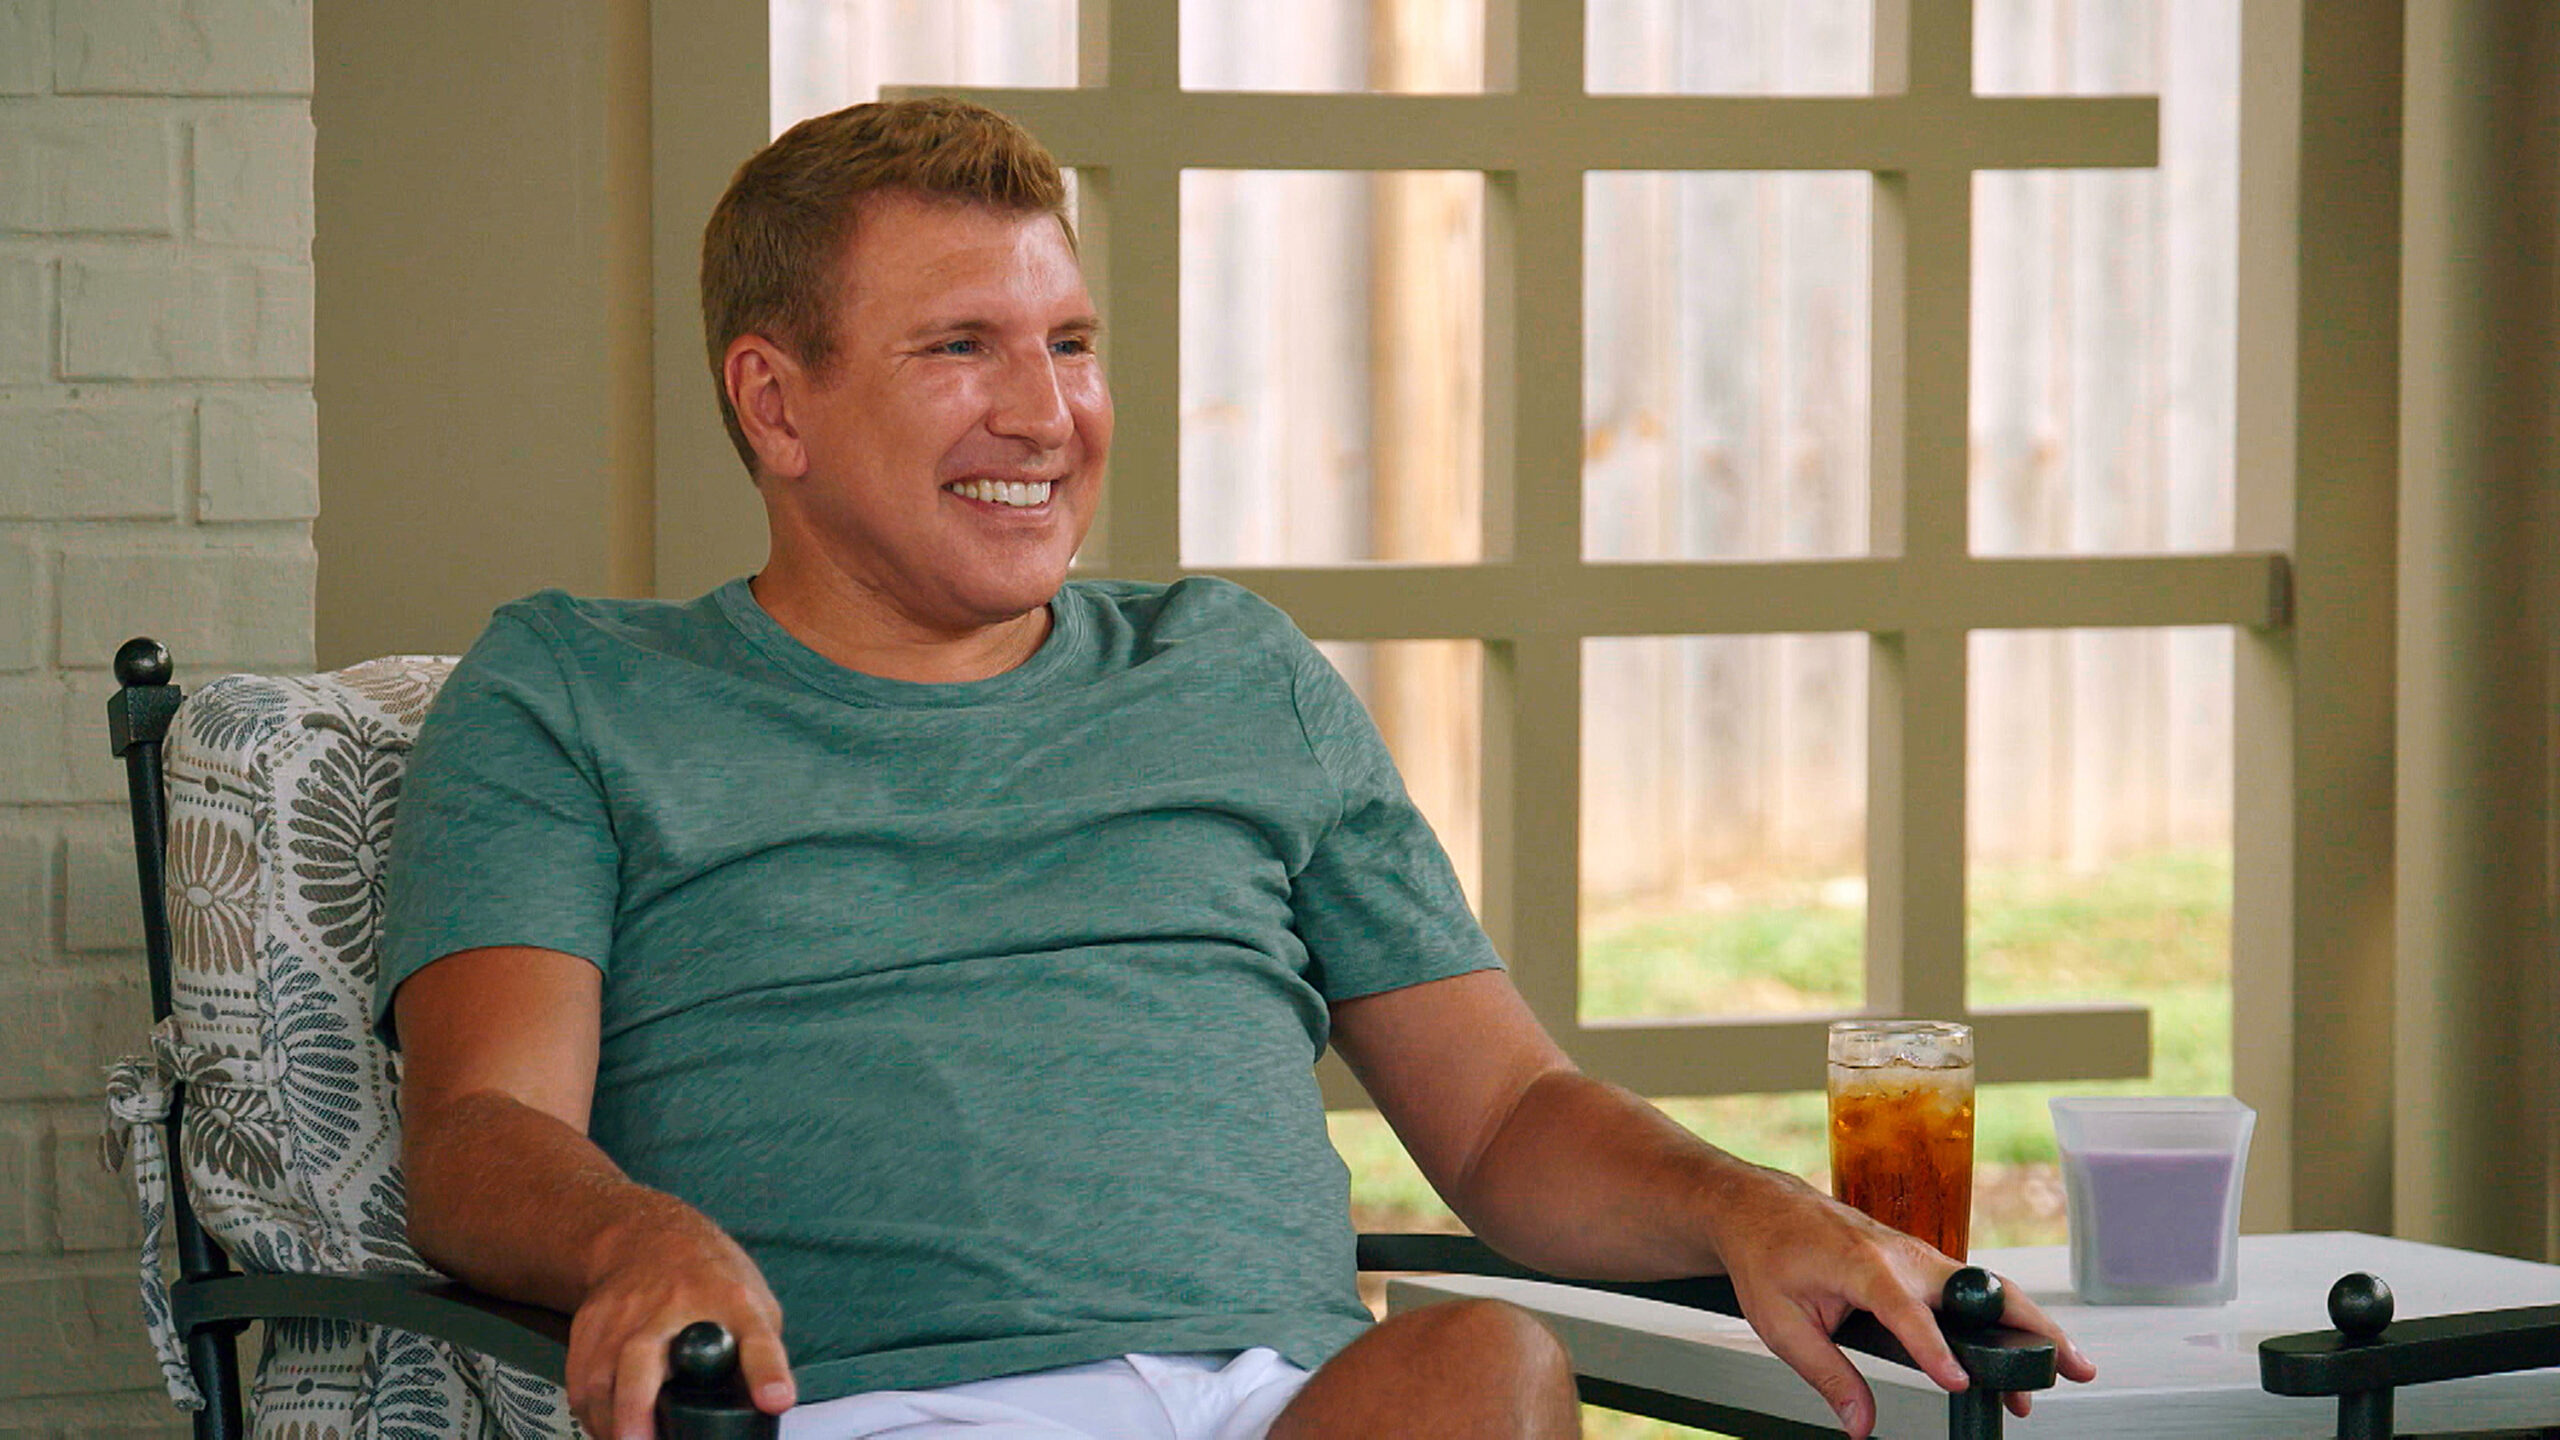 Reality TV personality Todd Chrisley found guilty of slandering a Georgia Revenue agent, ordered to pay 5,000 by jury